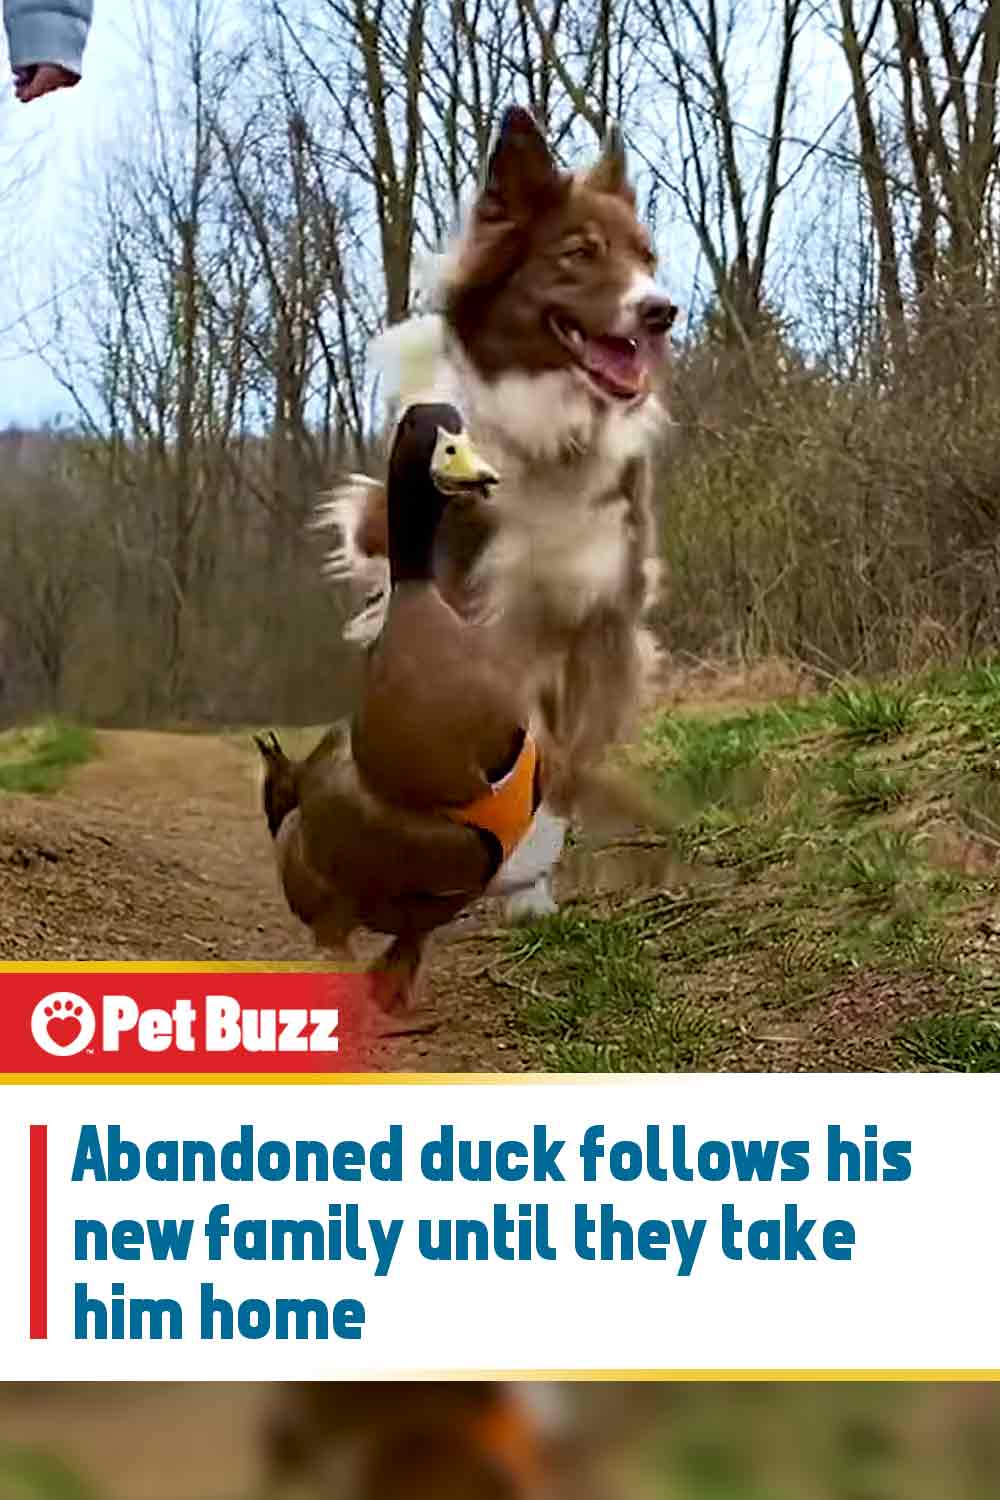 Abandoned duck follows his new family until they take him home